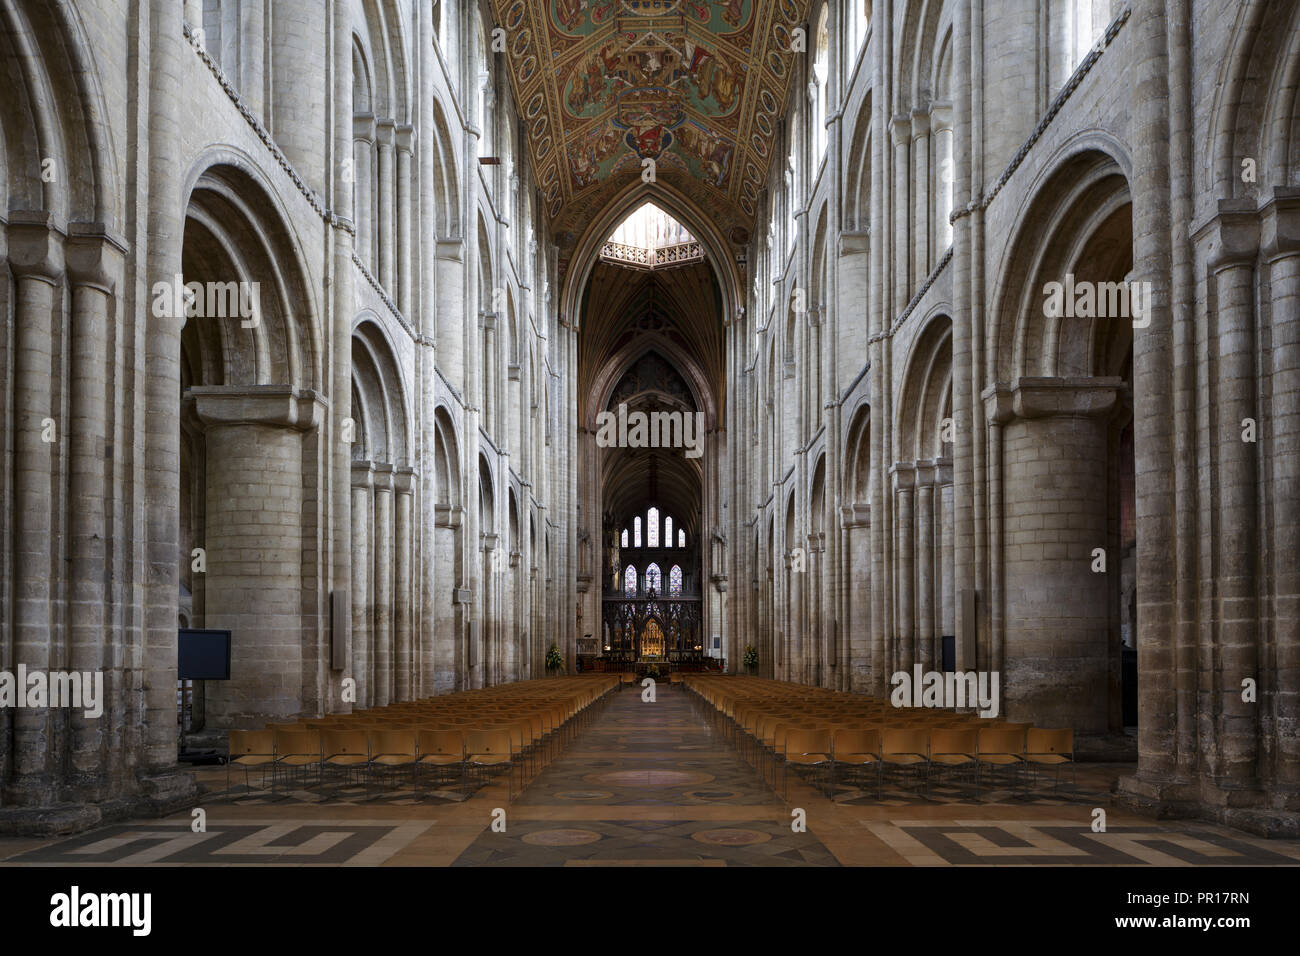 The nave of Ely Cathedral in Ely, Cambridgeshire, England, United Kingdom, Europe Stock Photo